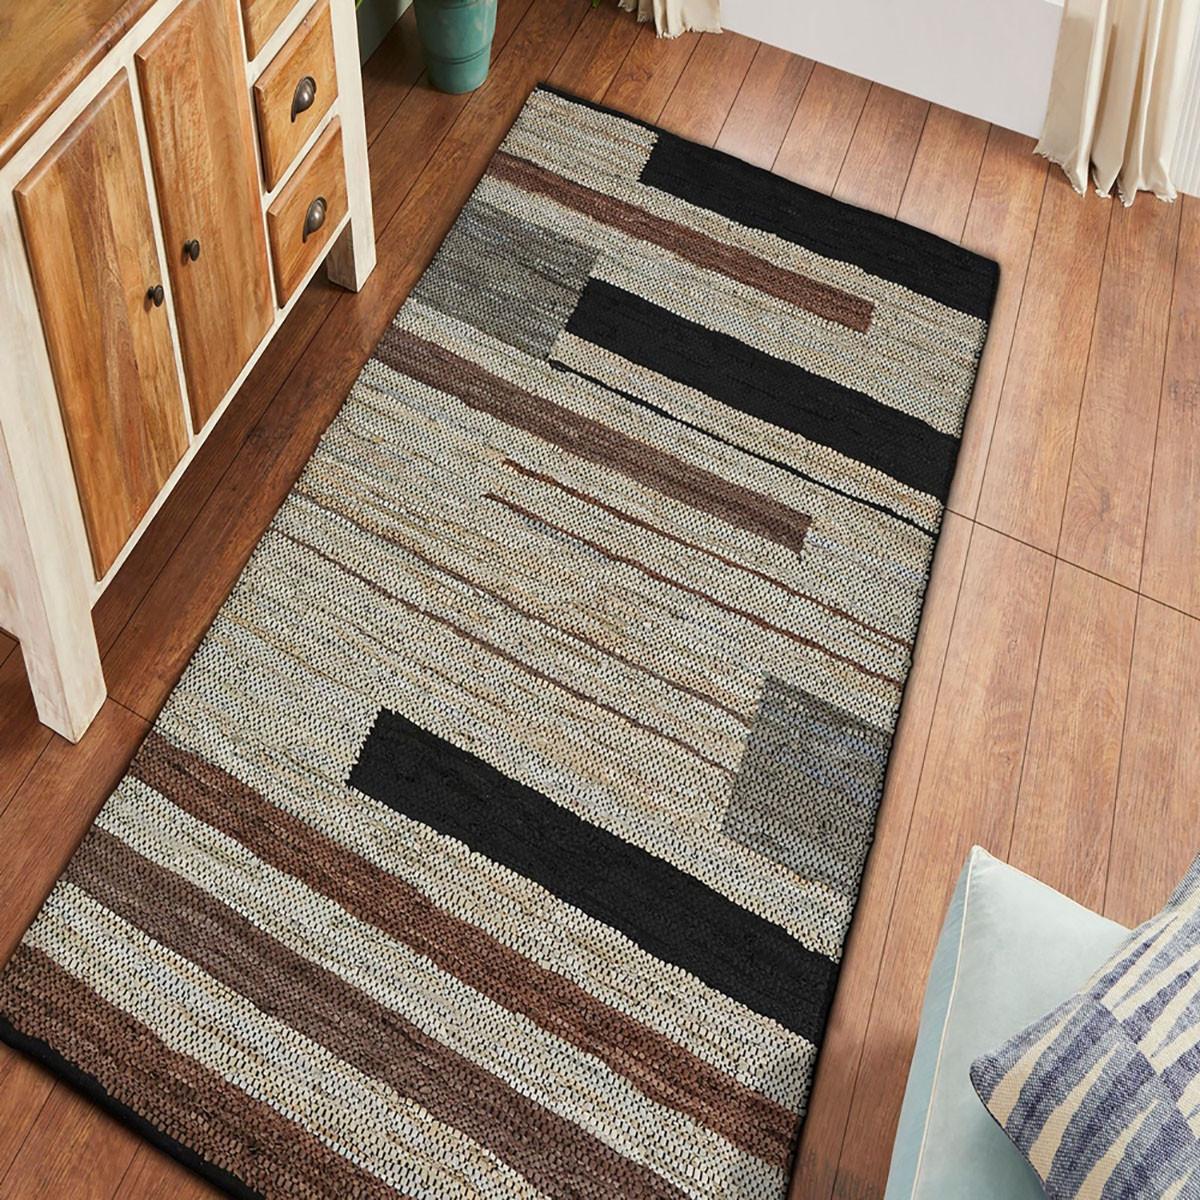 8' X 10' Oatmeal Striped Hand Woven Stain Resistant Area Rug